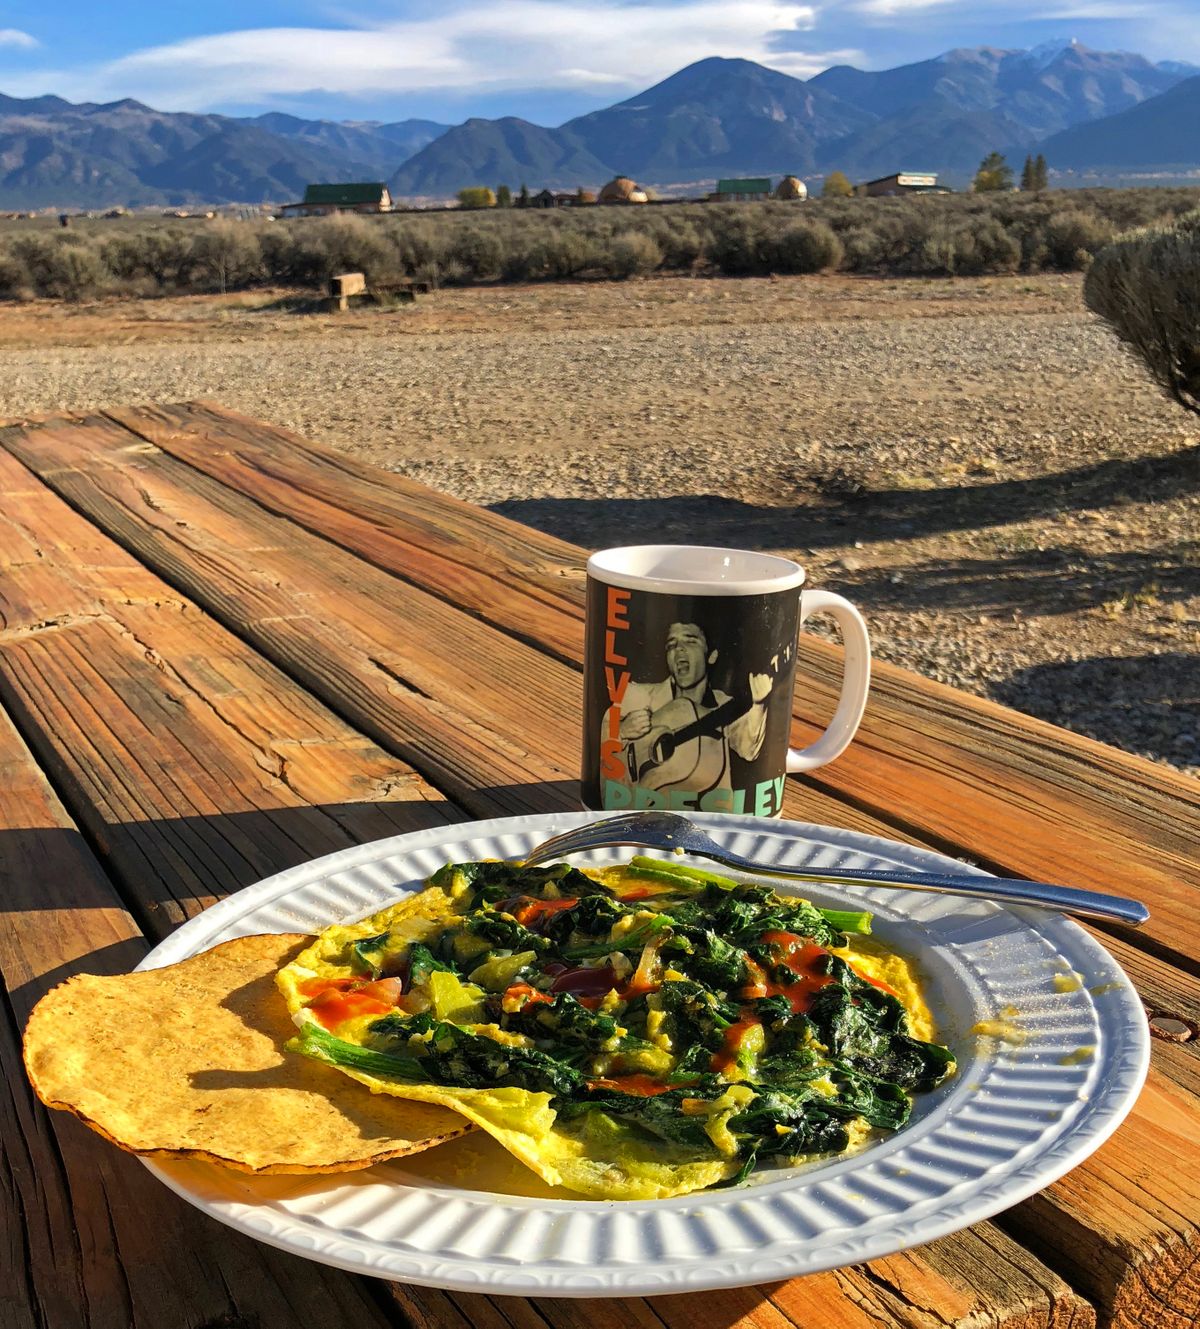 Eggs served over sauteed spinach on crispy tortillas make for a memorable breakfast in Taos, N.M.   (Leslie Kelly)